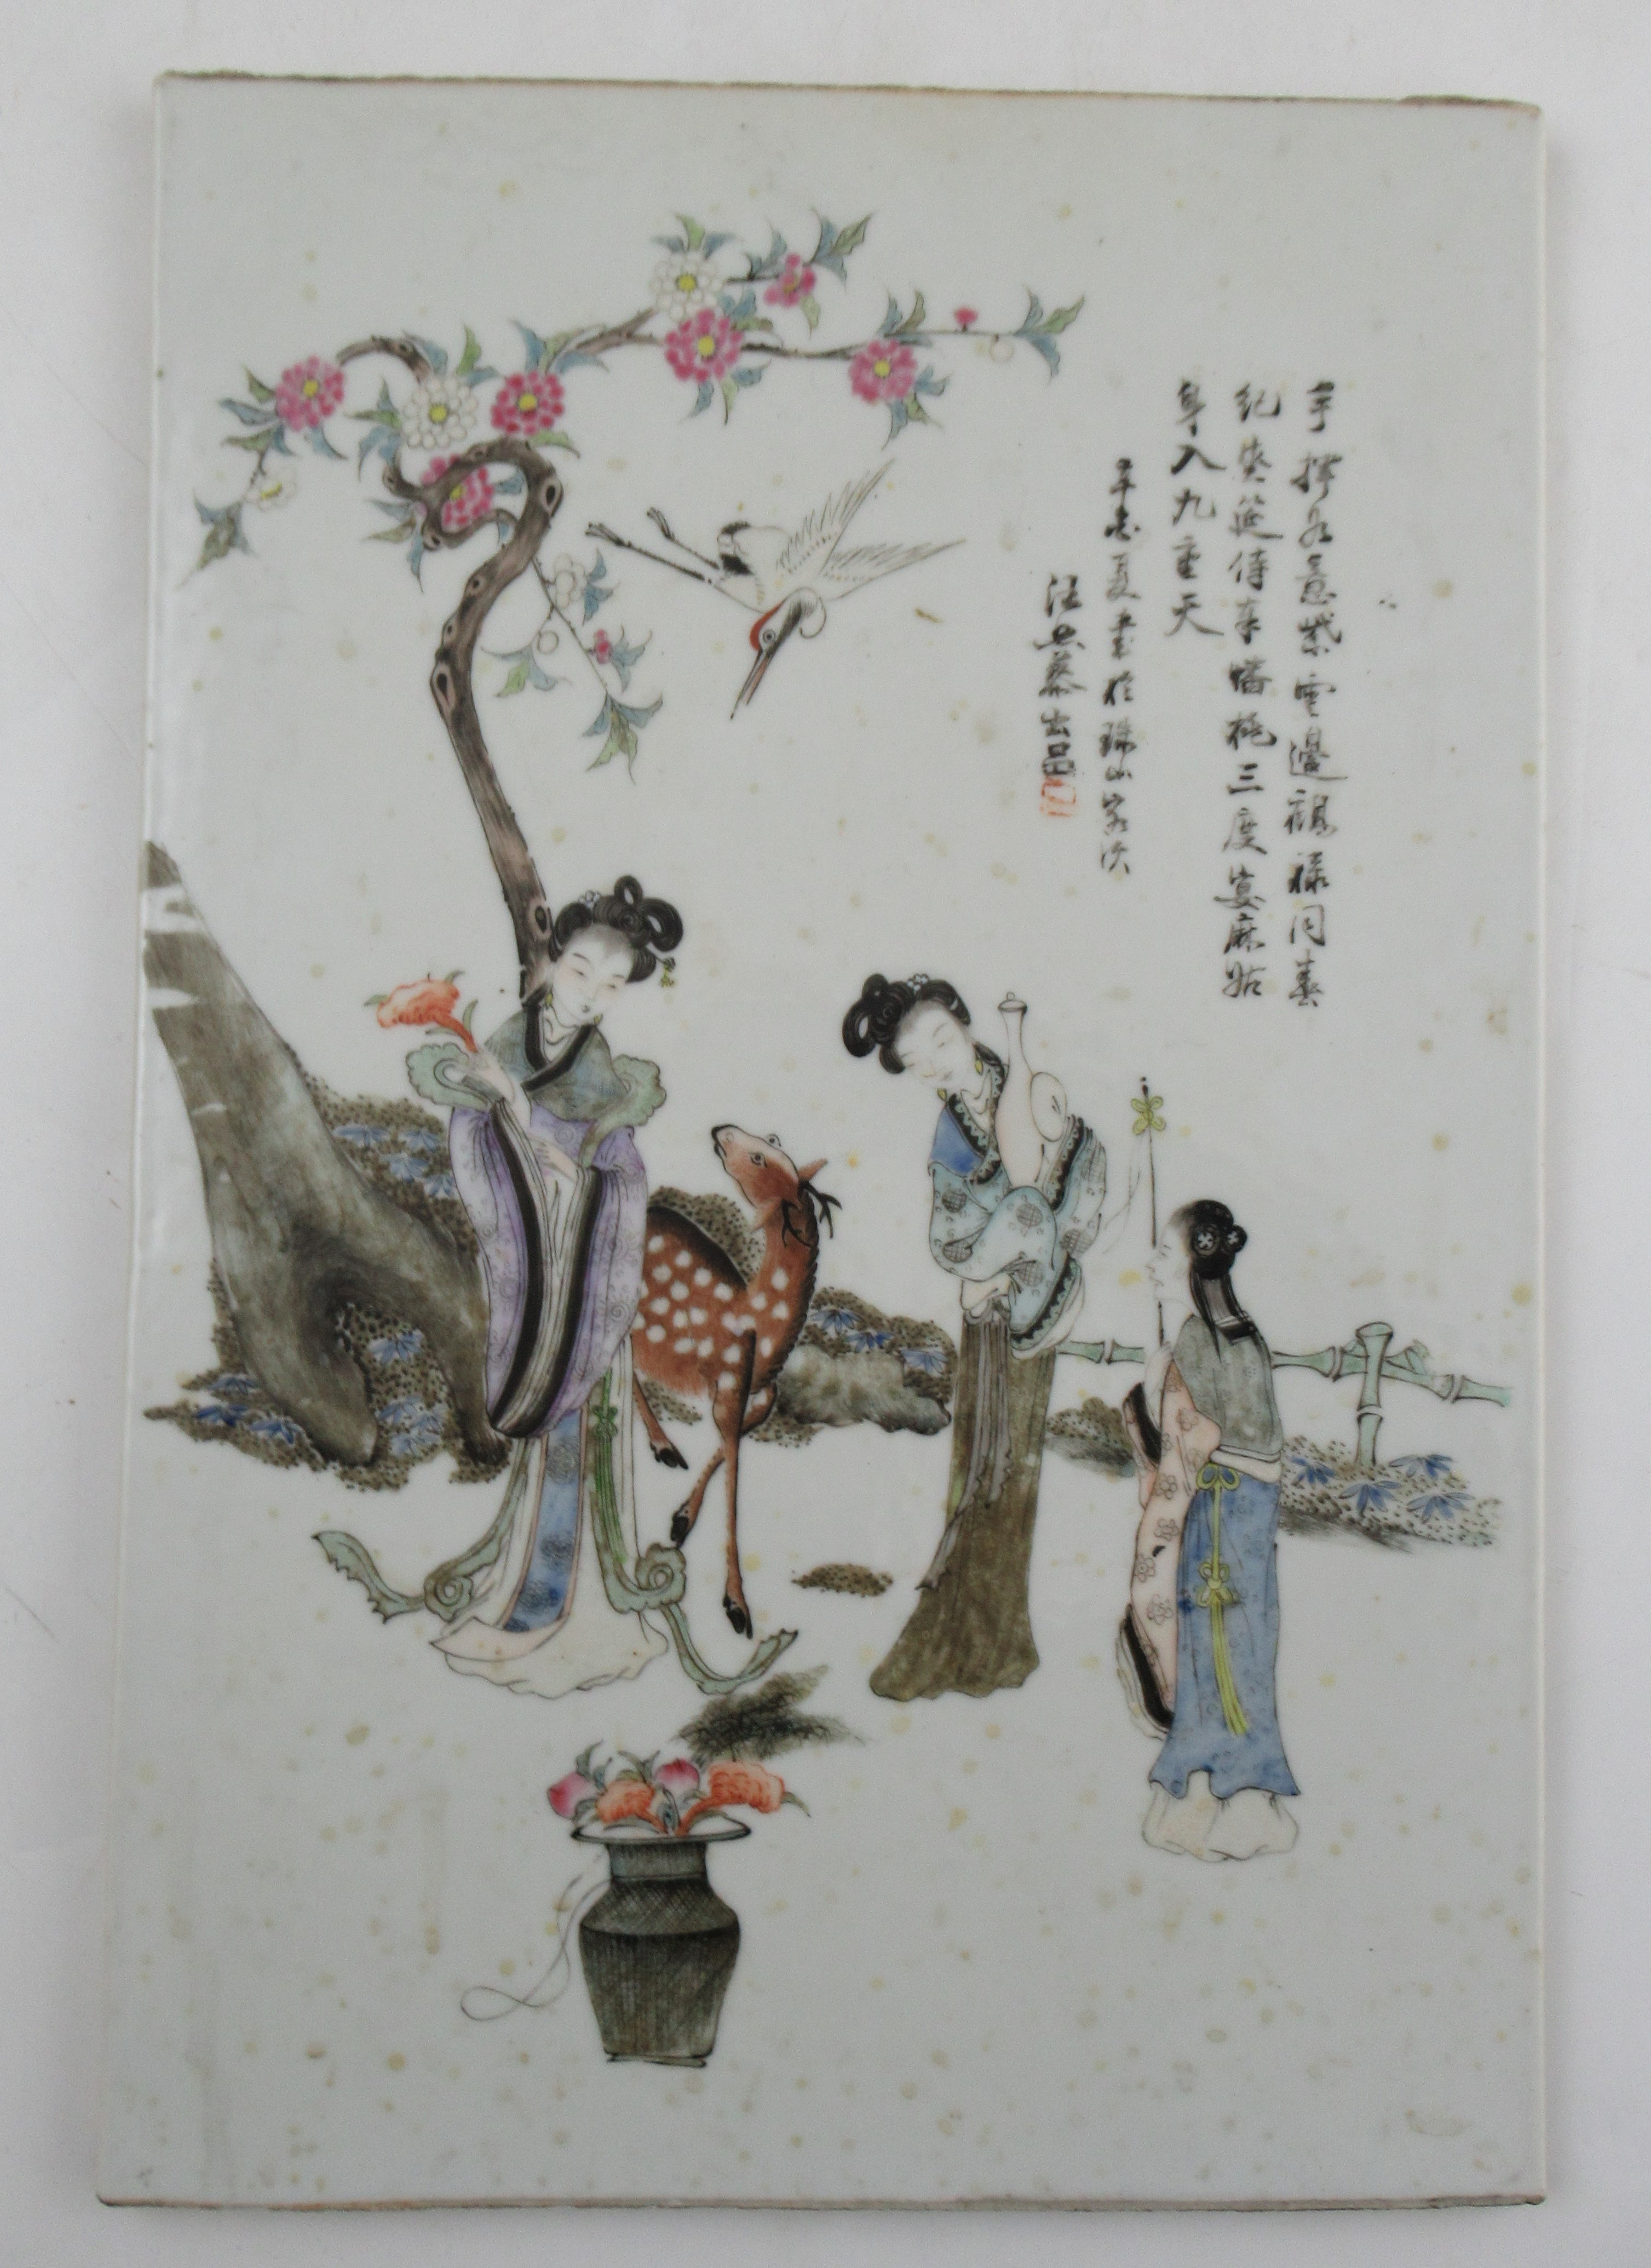 A Republic period Chinese plaque, decorated with figures, deer and foliage, character script, - Image 2 of 5